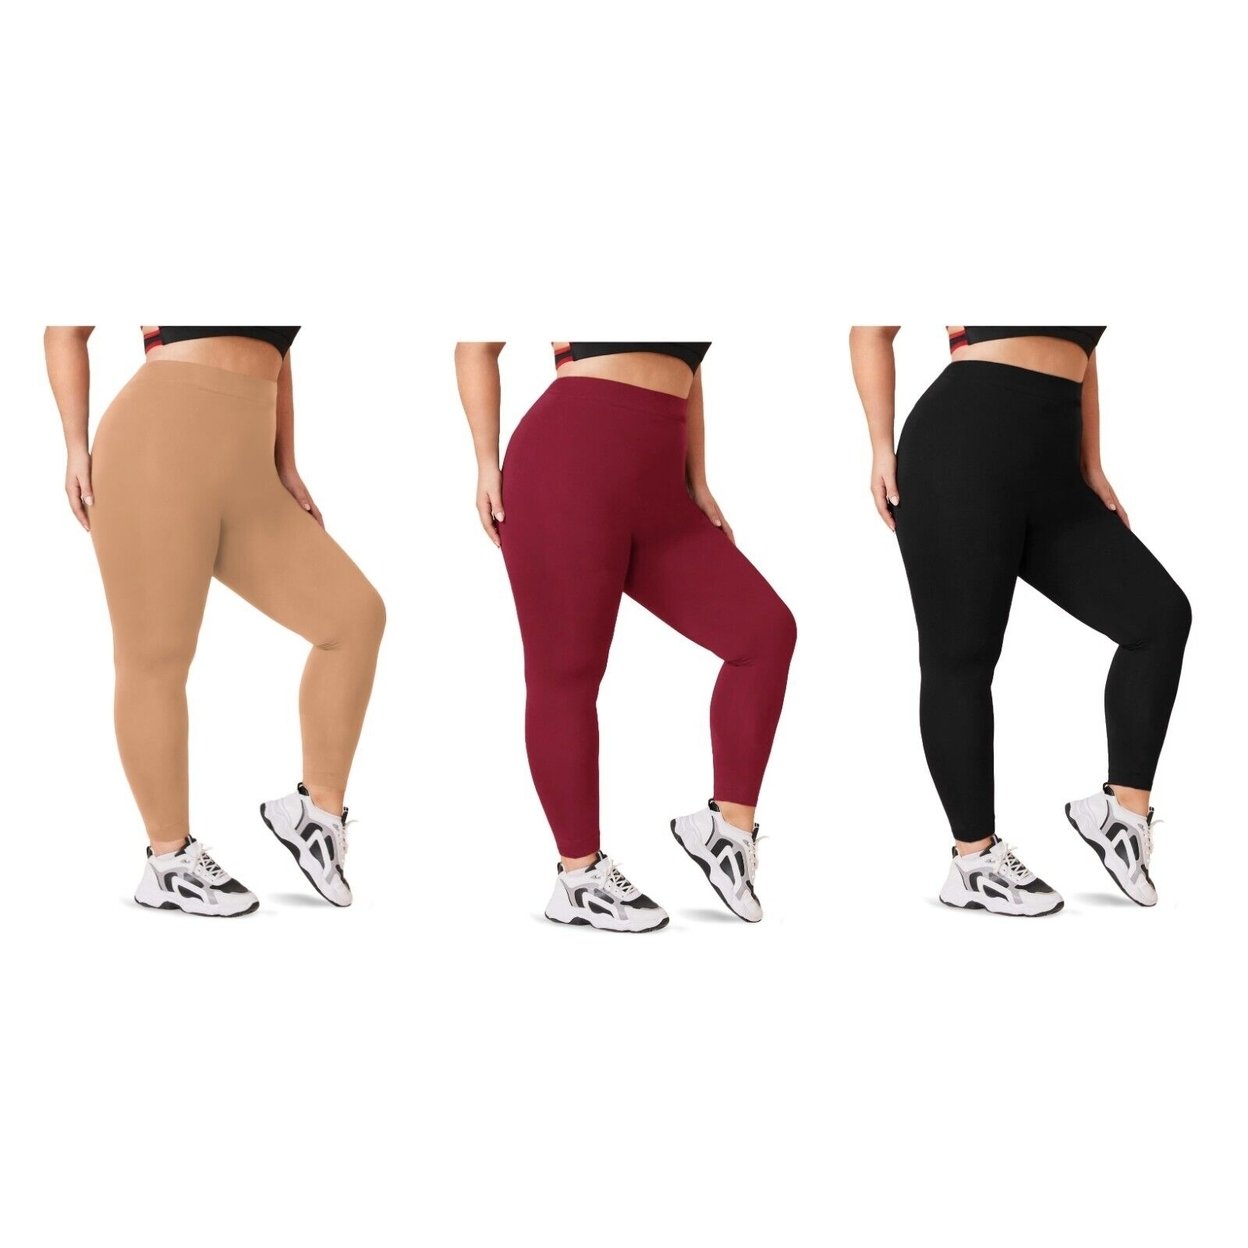 2-Pack: Women's Casual Ultra-Soft Smooth High Waisted Athletic Active Yoga Leggings Plus Size Available - Beige & Red, 1x